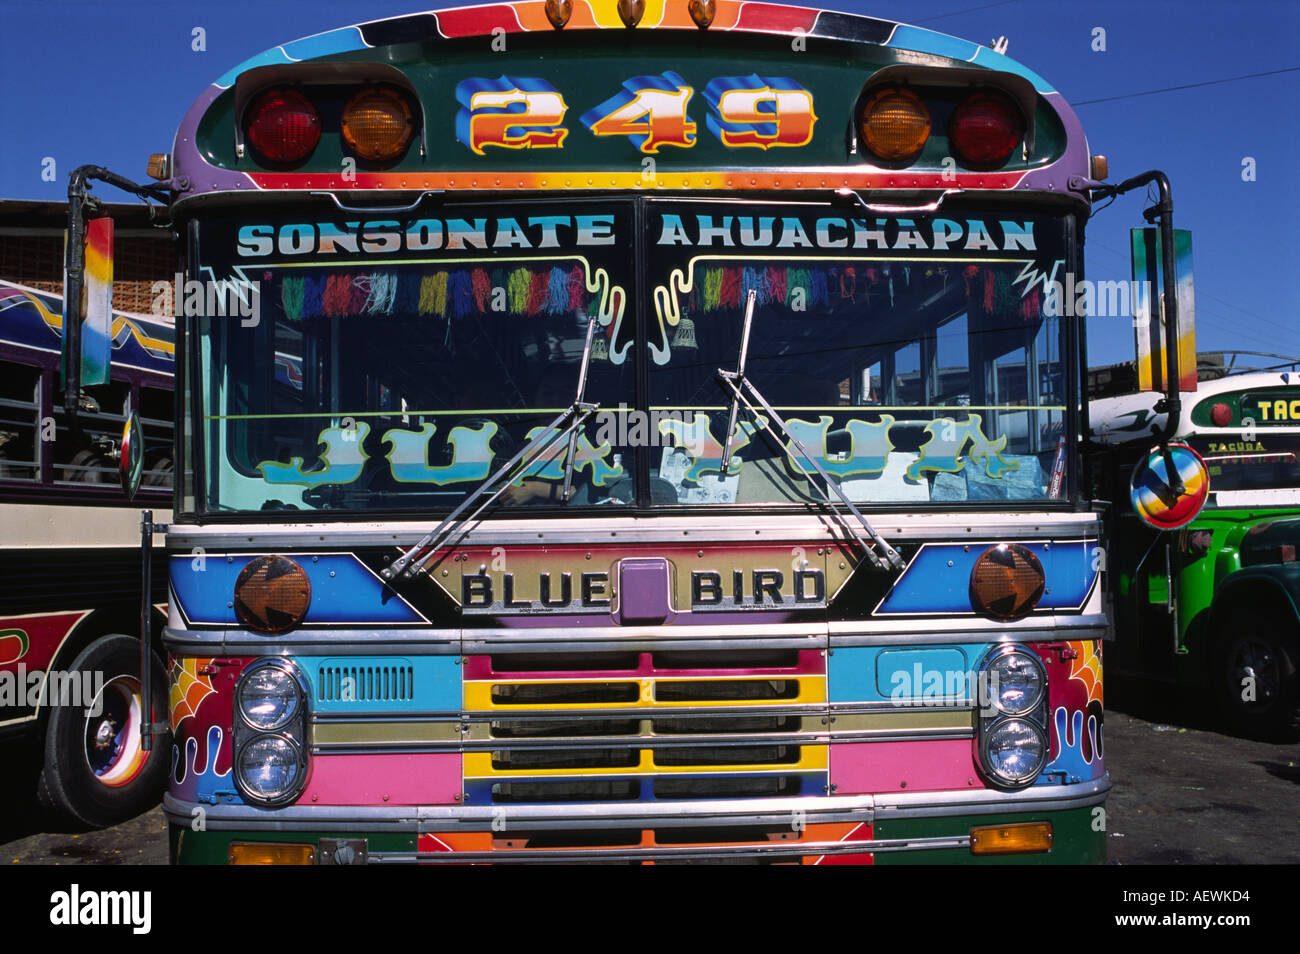 A brightly painted Blue Bird bus in Ahuachapan bus station El Salvador Stock Photo